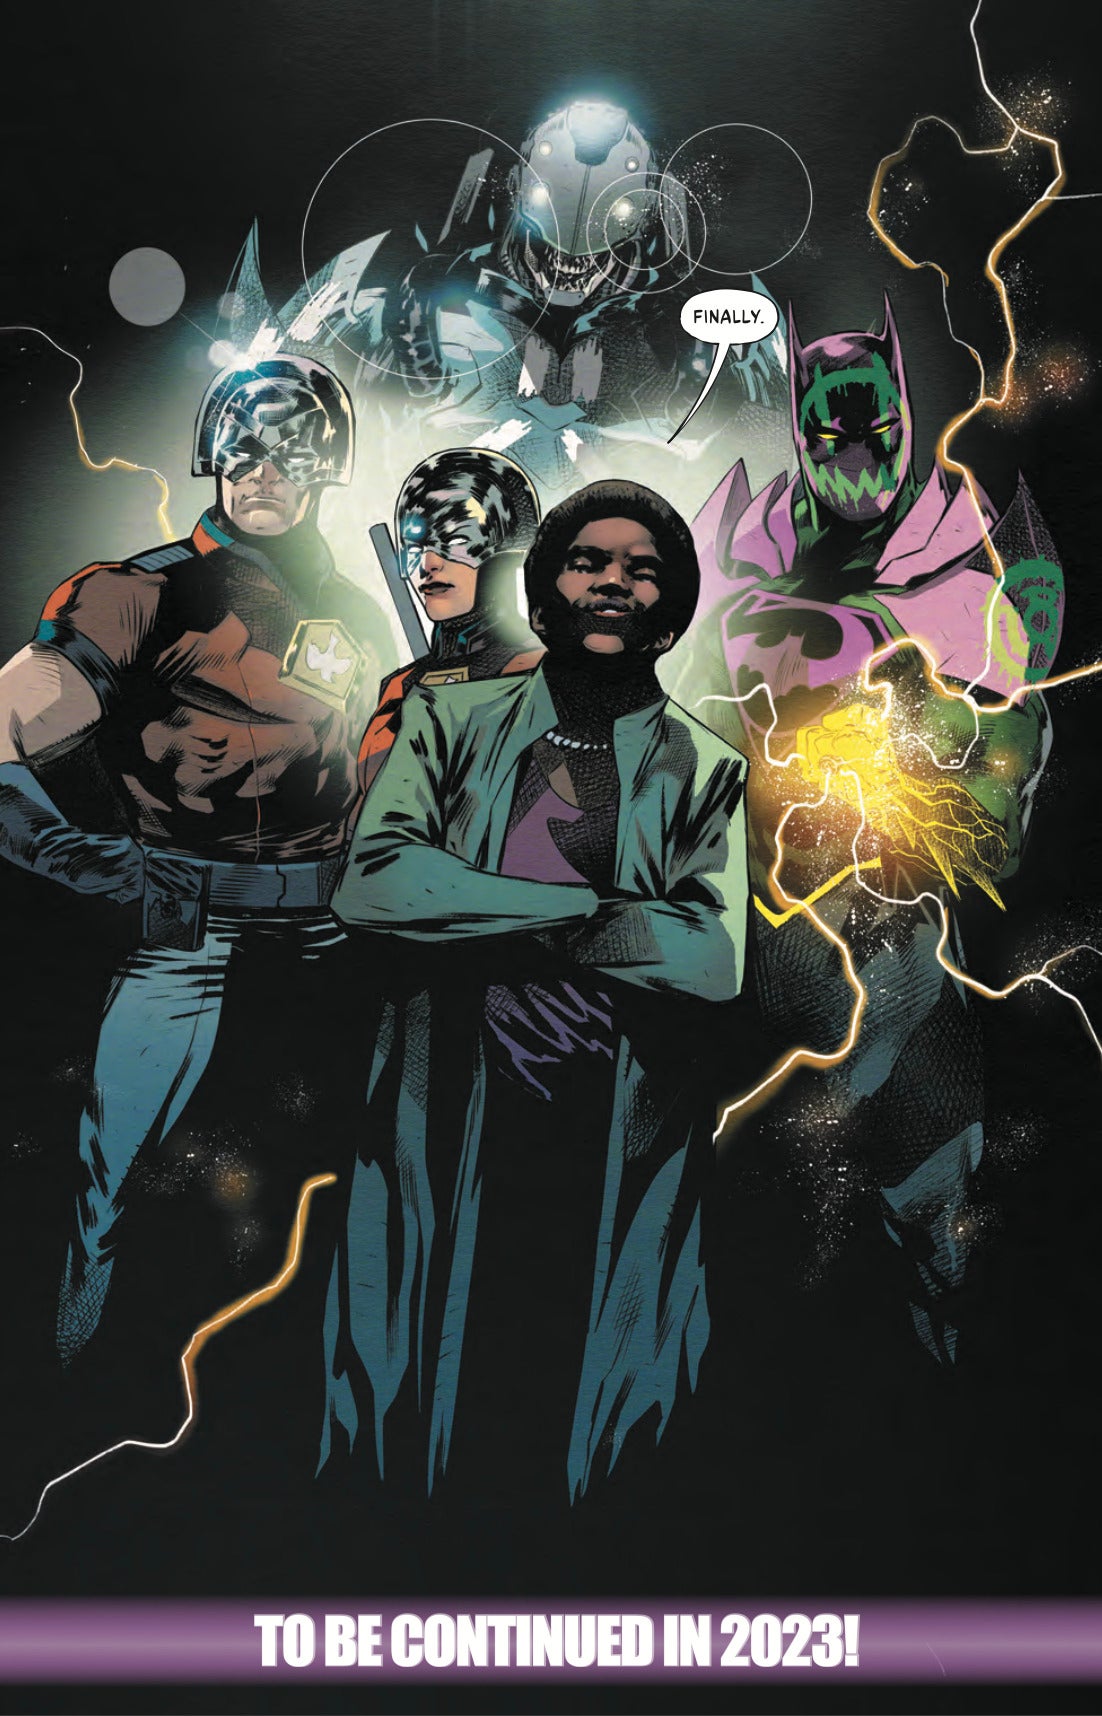 Amanda Waller stands with her new team